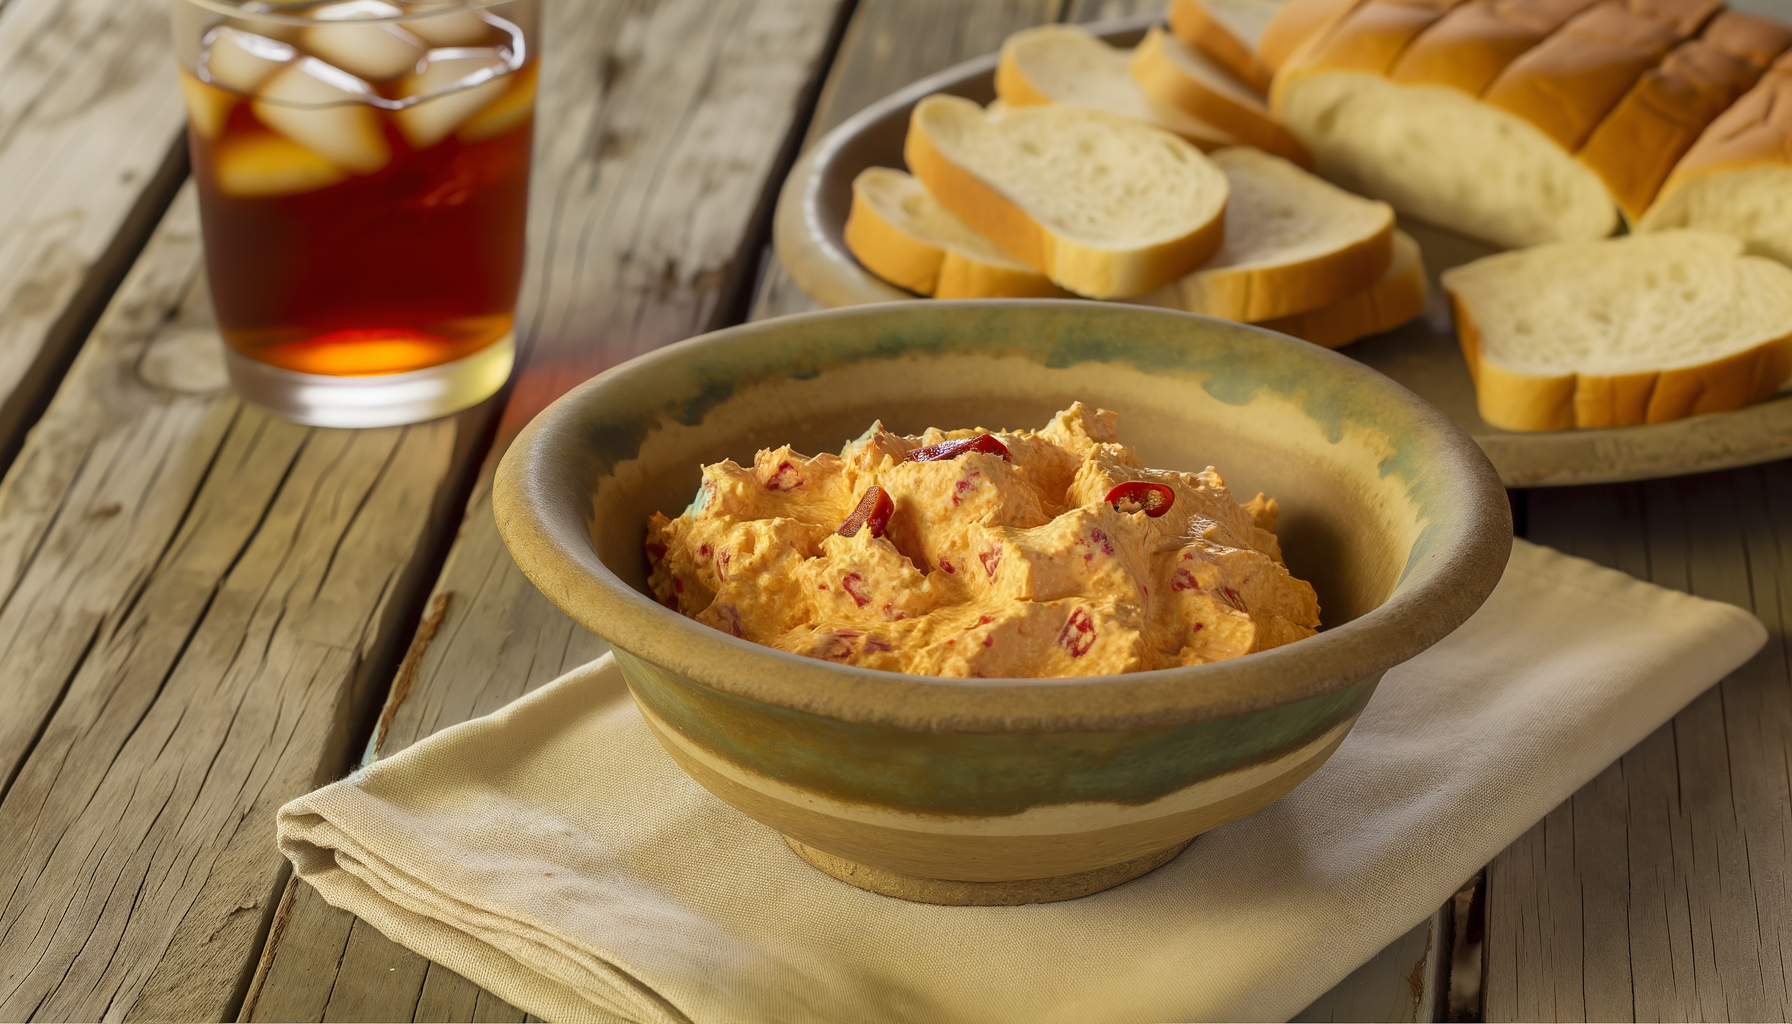 Rustic bowl of vibrant Southern Pimento Cheese with bread slices, on a wooden table with iced tea adding Southern charm.